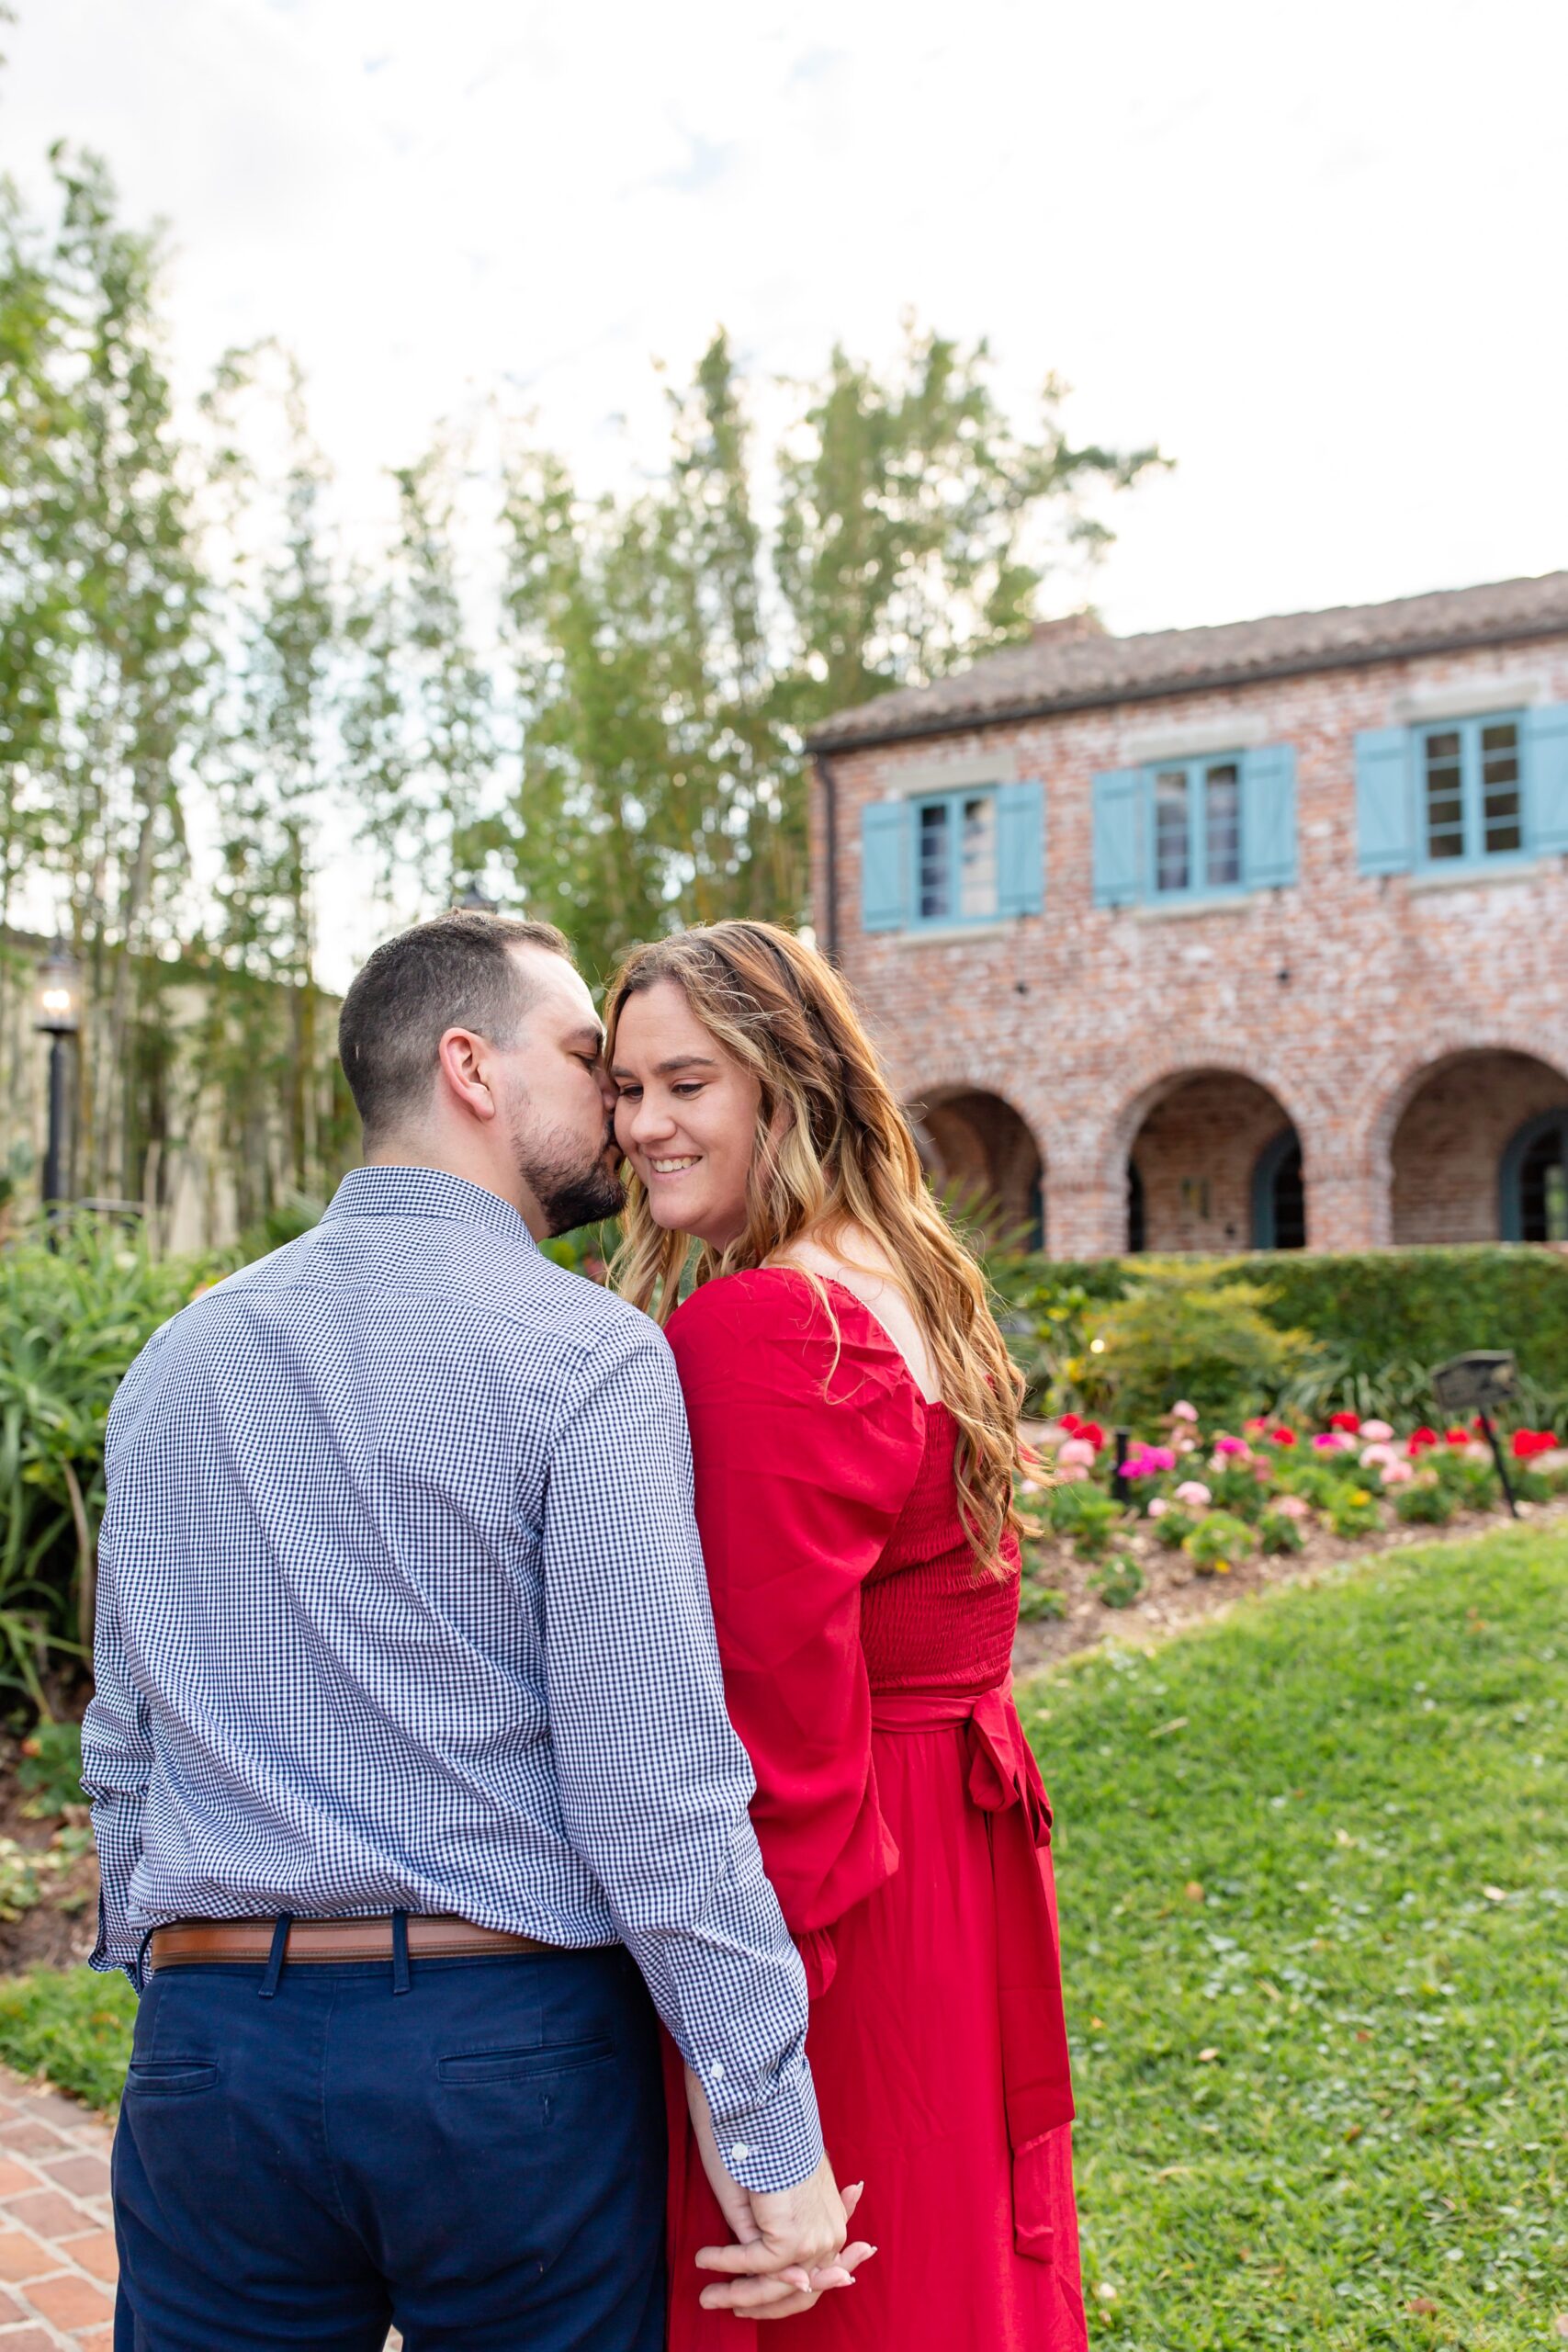 Casa Feliz Historic Home Orlando Engagement Photos — Guy kissing girl in front of spring flowers and brick arches at Spanish historic home in Winter Park, Florida